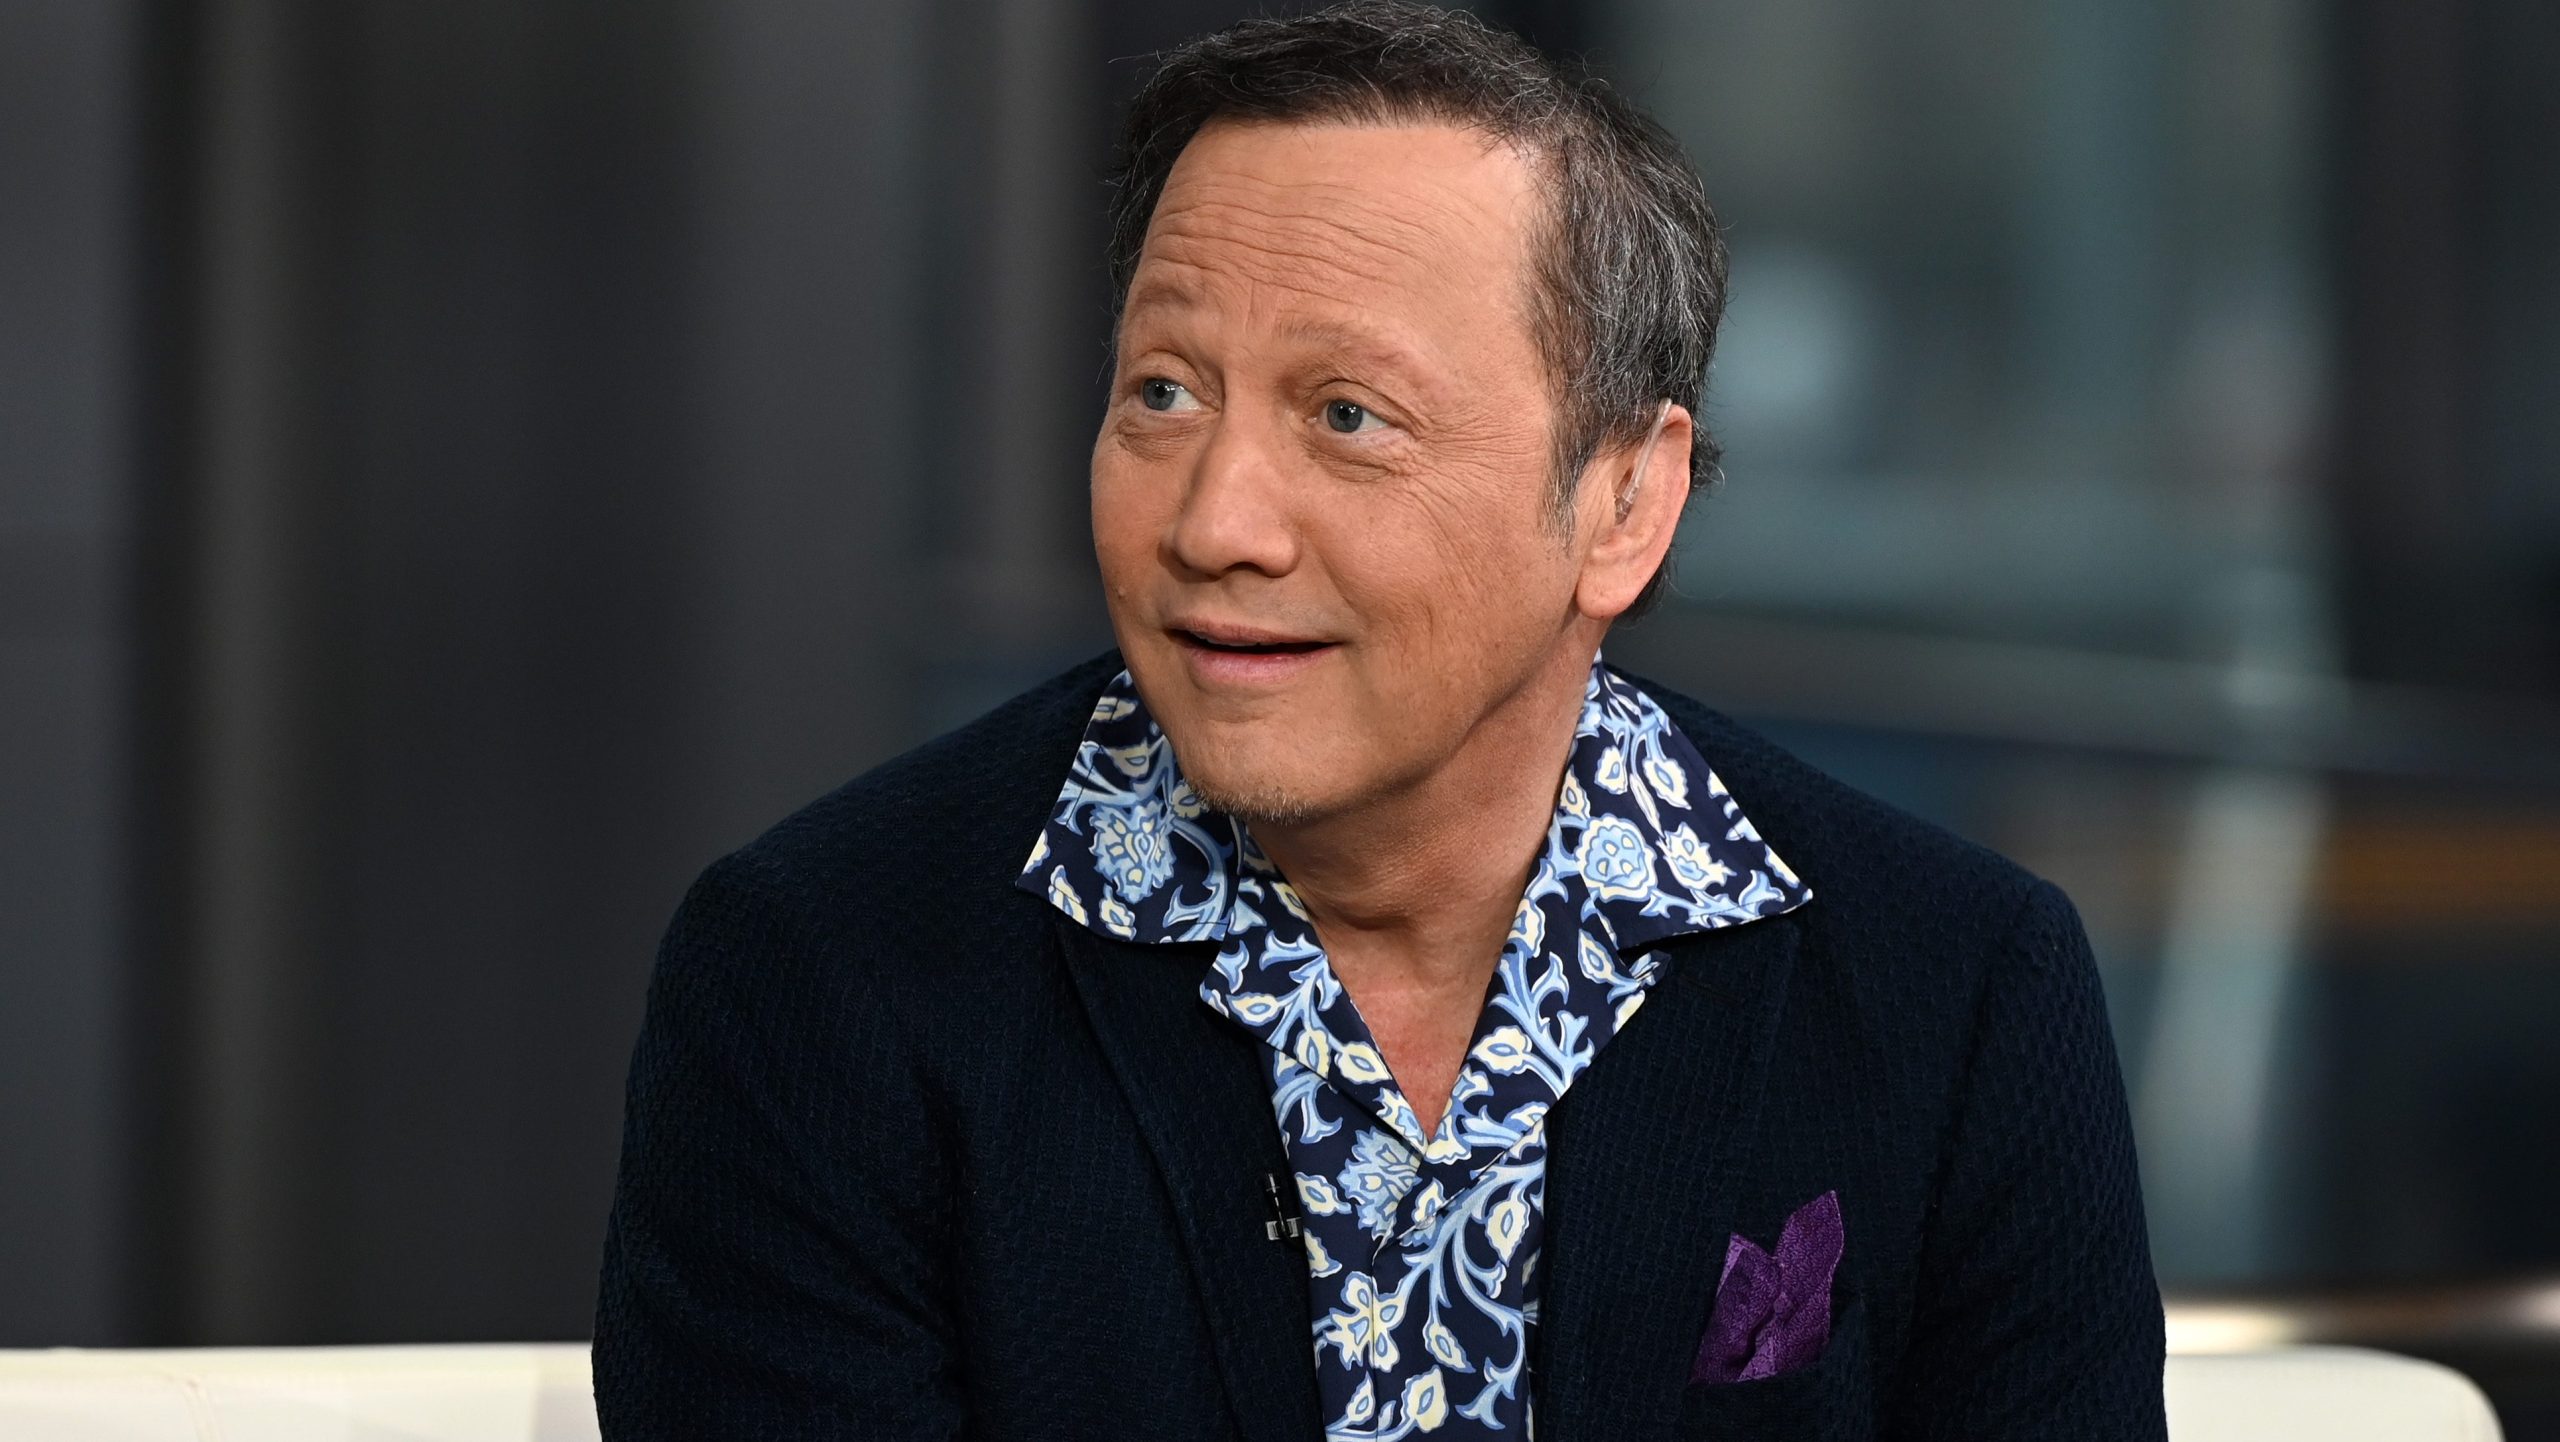 Rob Schneider mocks the ‘liberal intelligentsia’ in ‘Woke Up in America’ comedy special